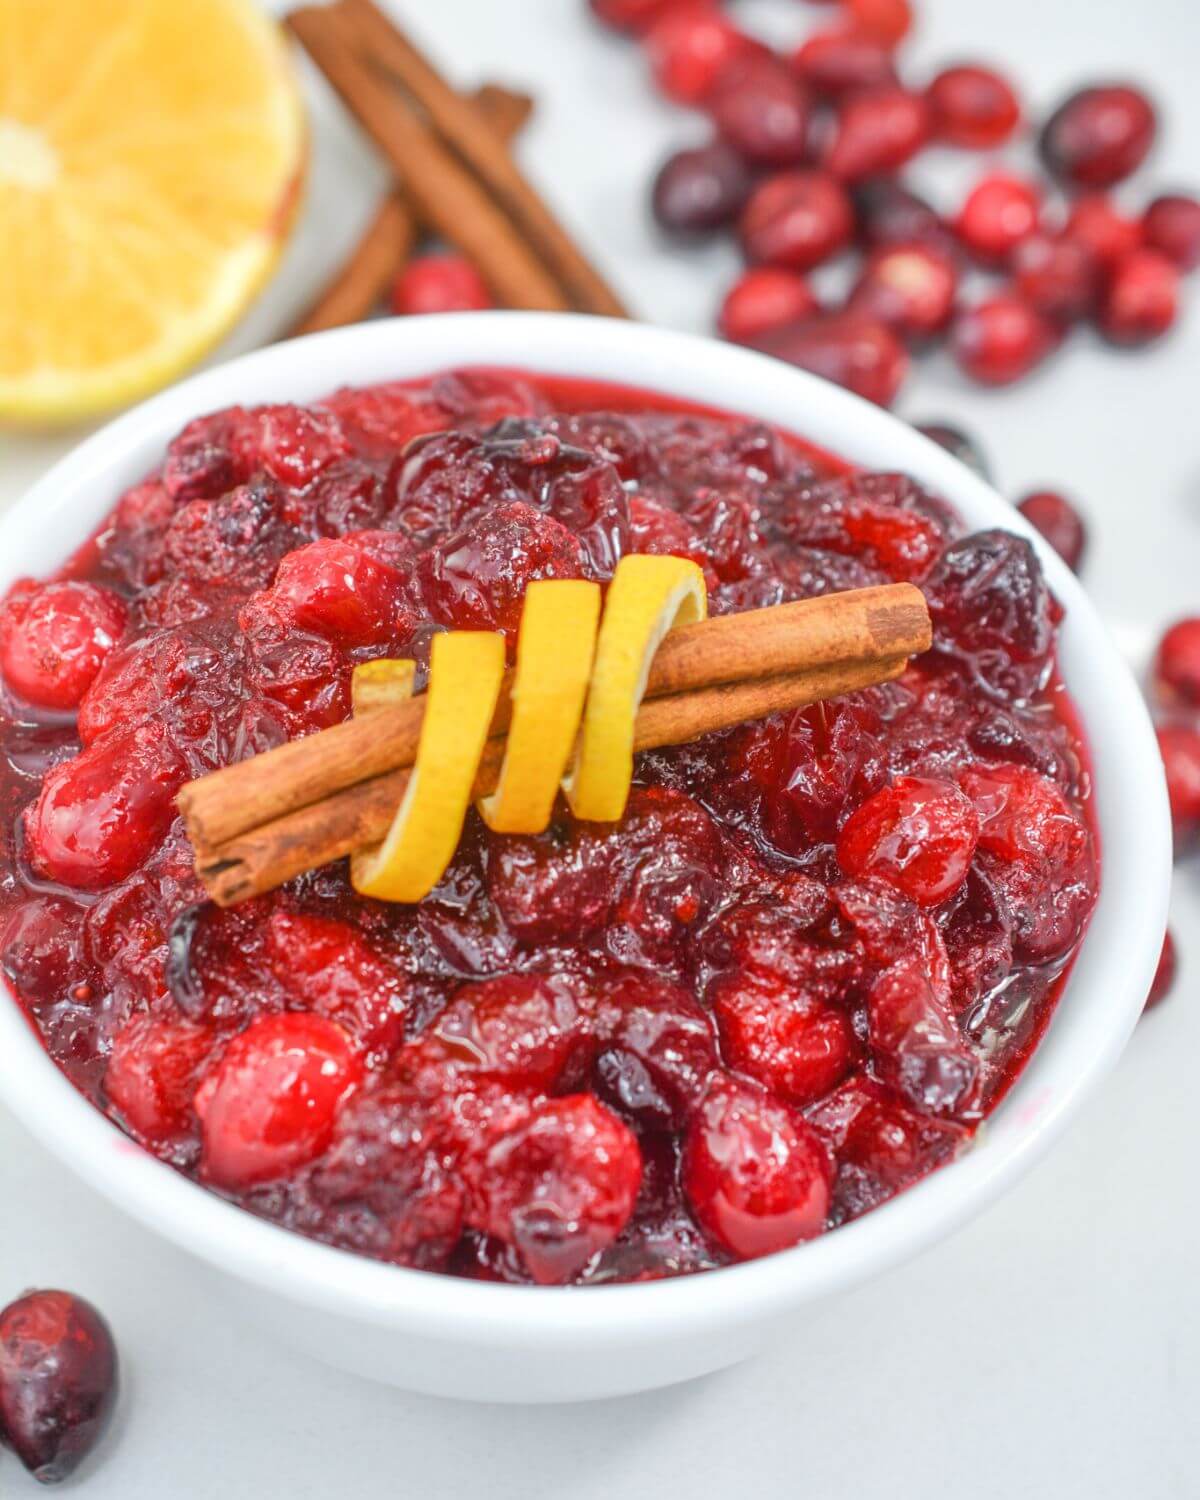 Homemade Ocean Spray Cranberry Sauce in a white bowl with a cinnamon stick wrapped in orange peel.